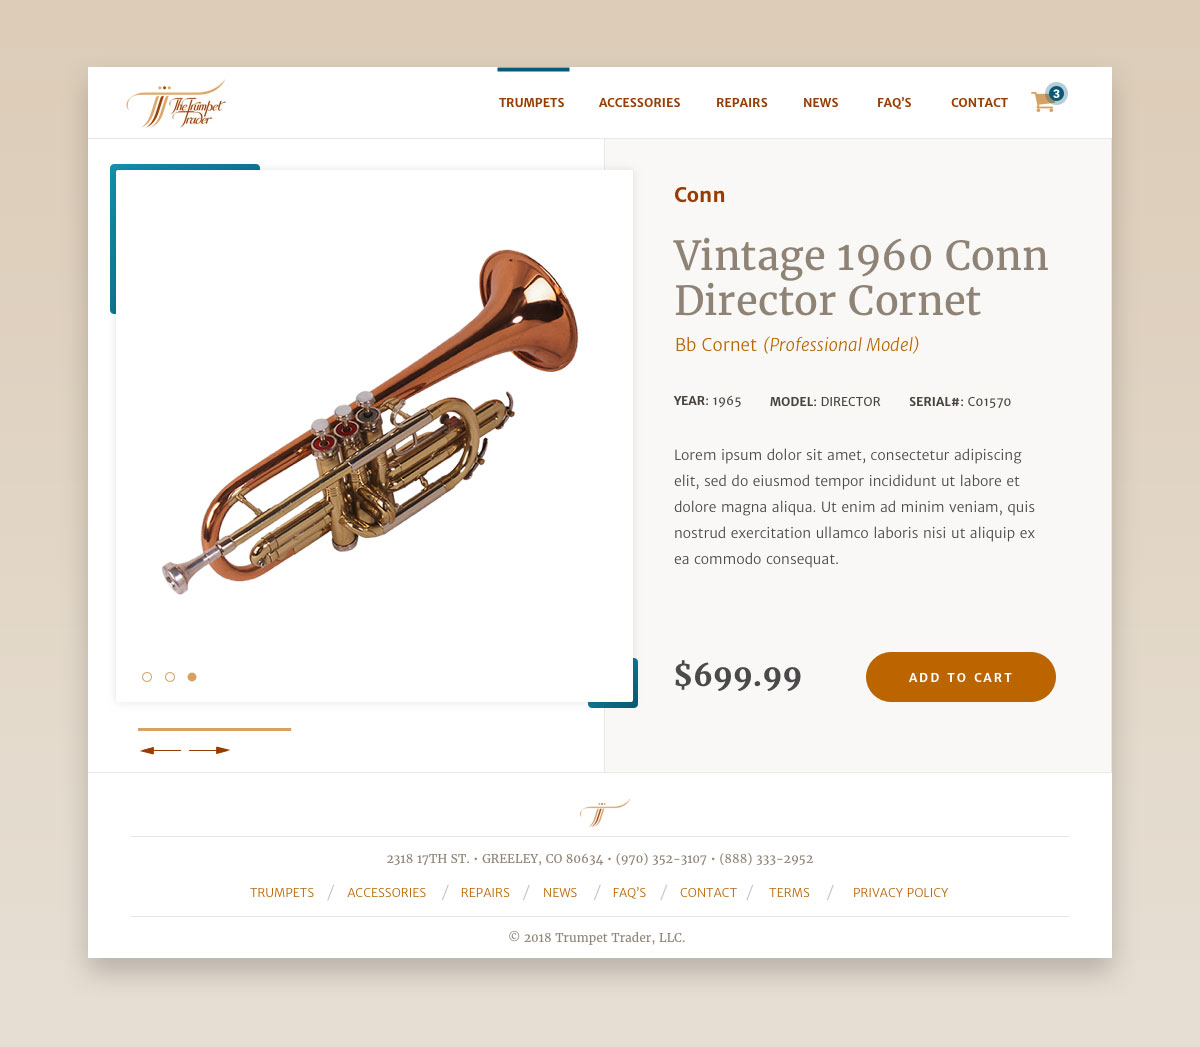 Product page for the Trumpet Trader website.